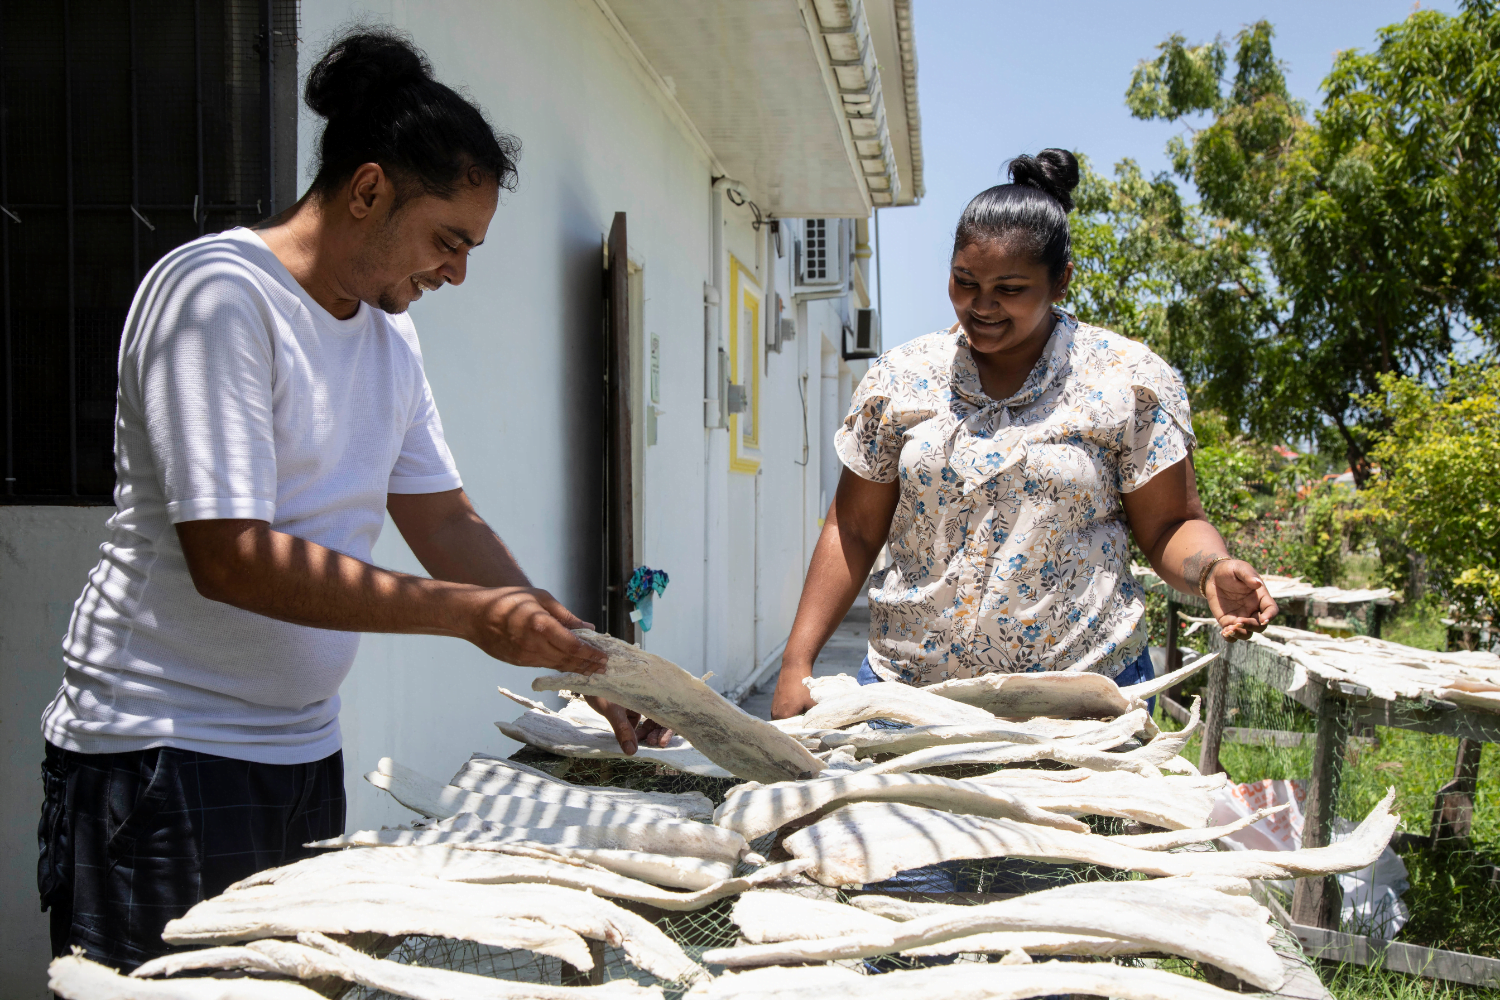 Radhika Basdeo, Sole Proprietress of Basdeo's Dynasty in Guyana instructs a male staff member on drying fish.